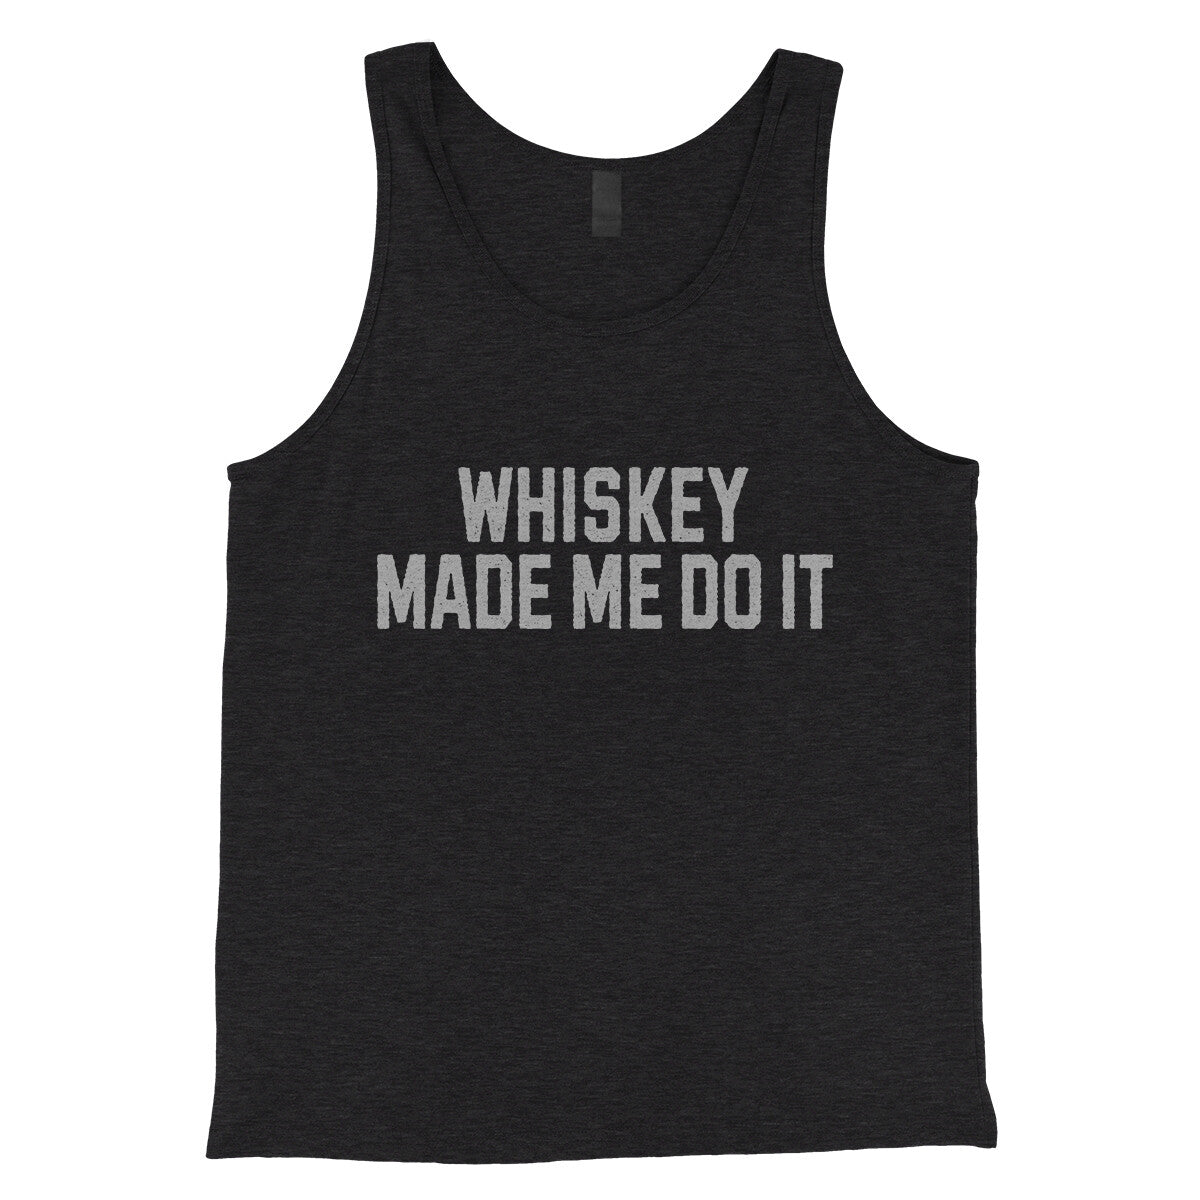 Whiskey Made Me Do It in Charcoal Black TriBlend Color